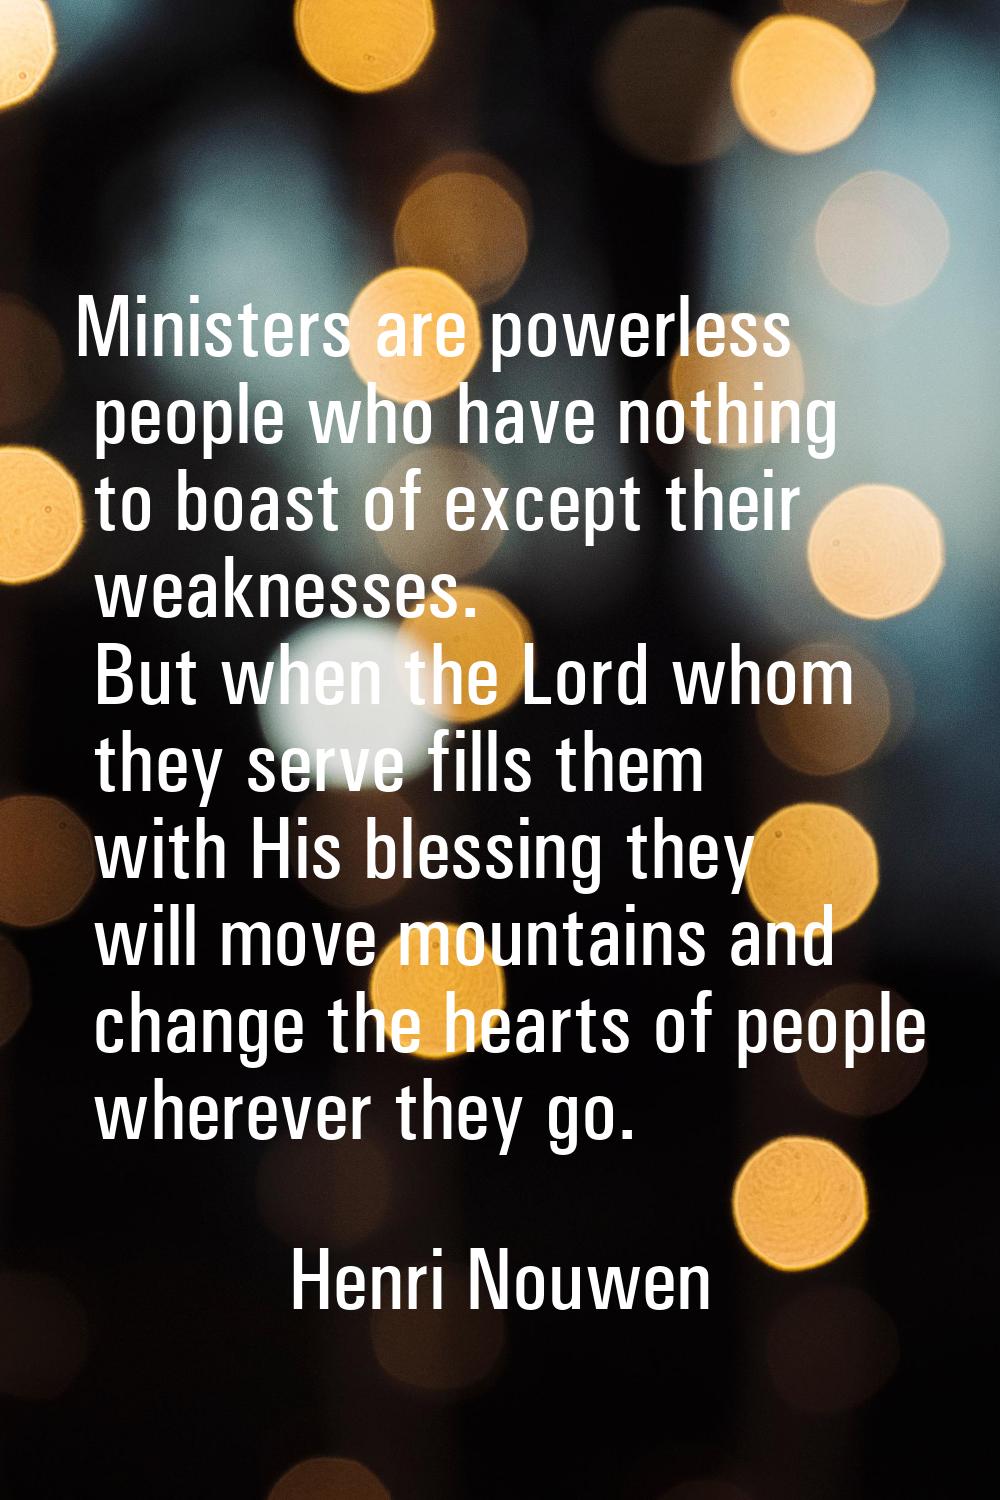 Ministers are powerless people who have nothing to boast of except their weaknesses. But when the L